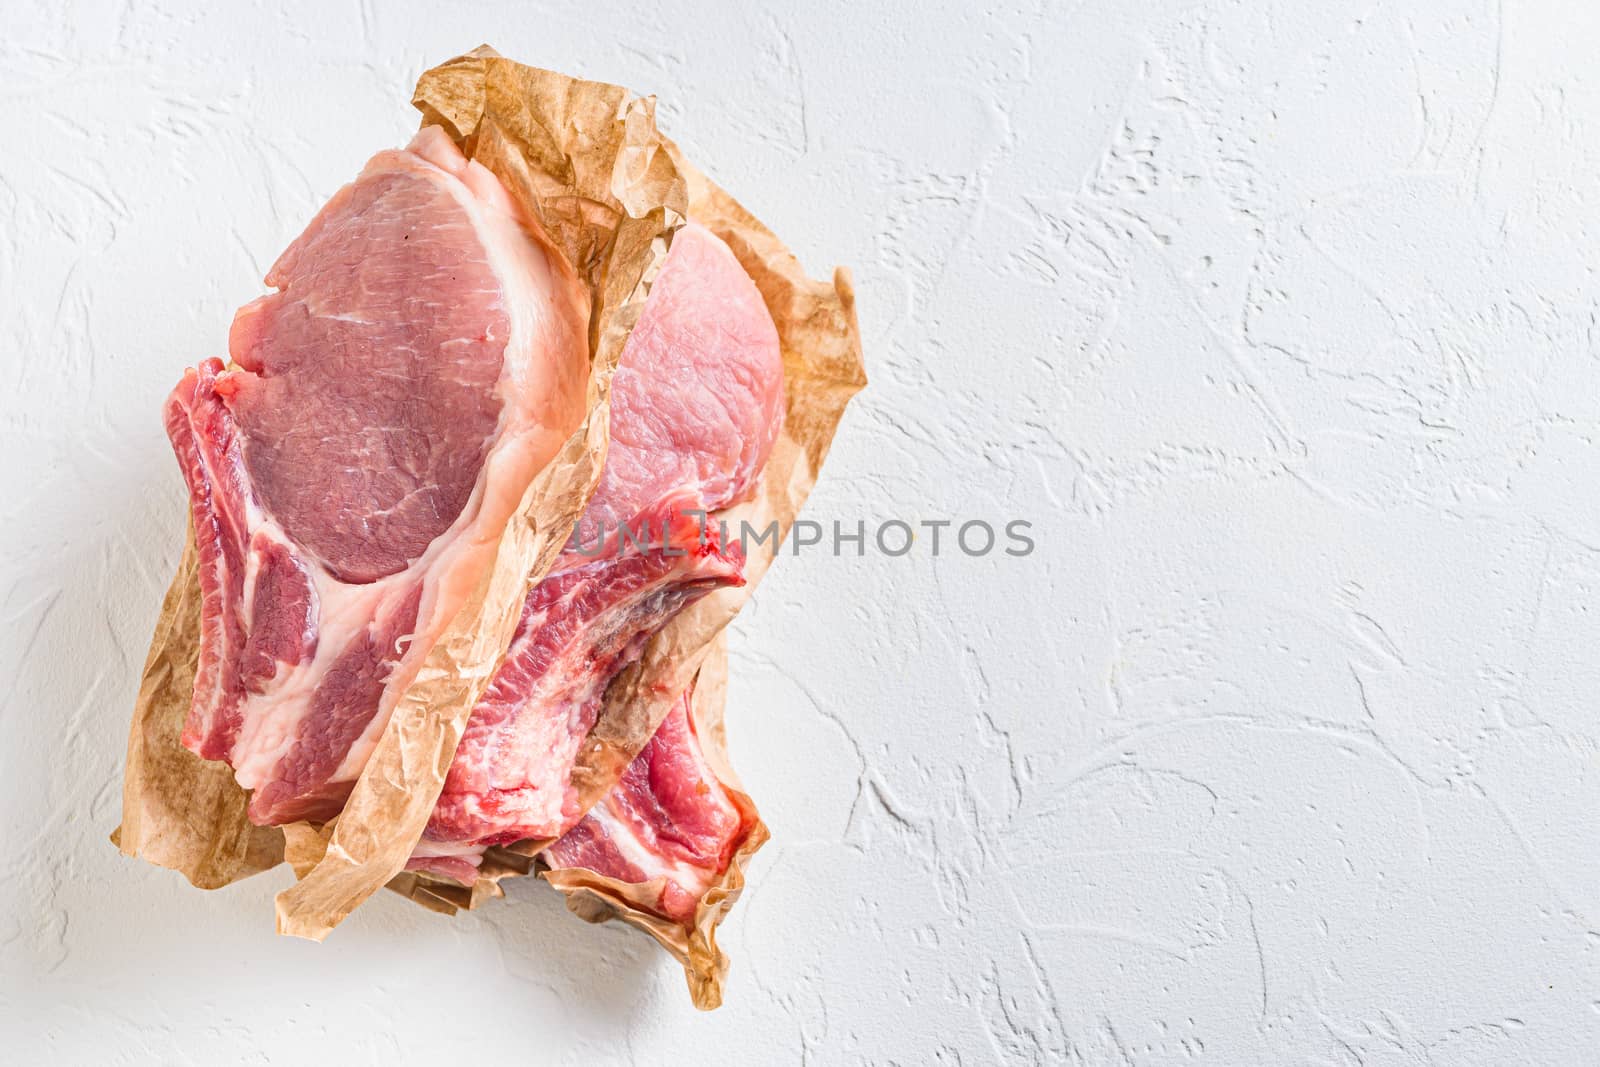 Raw organic bio Pork Belly grill. from above view on white stone background horizontal. Copyspace